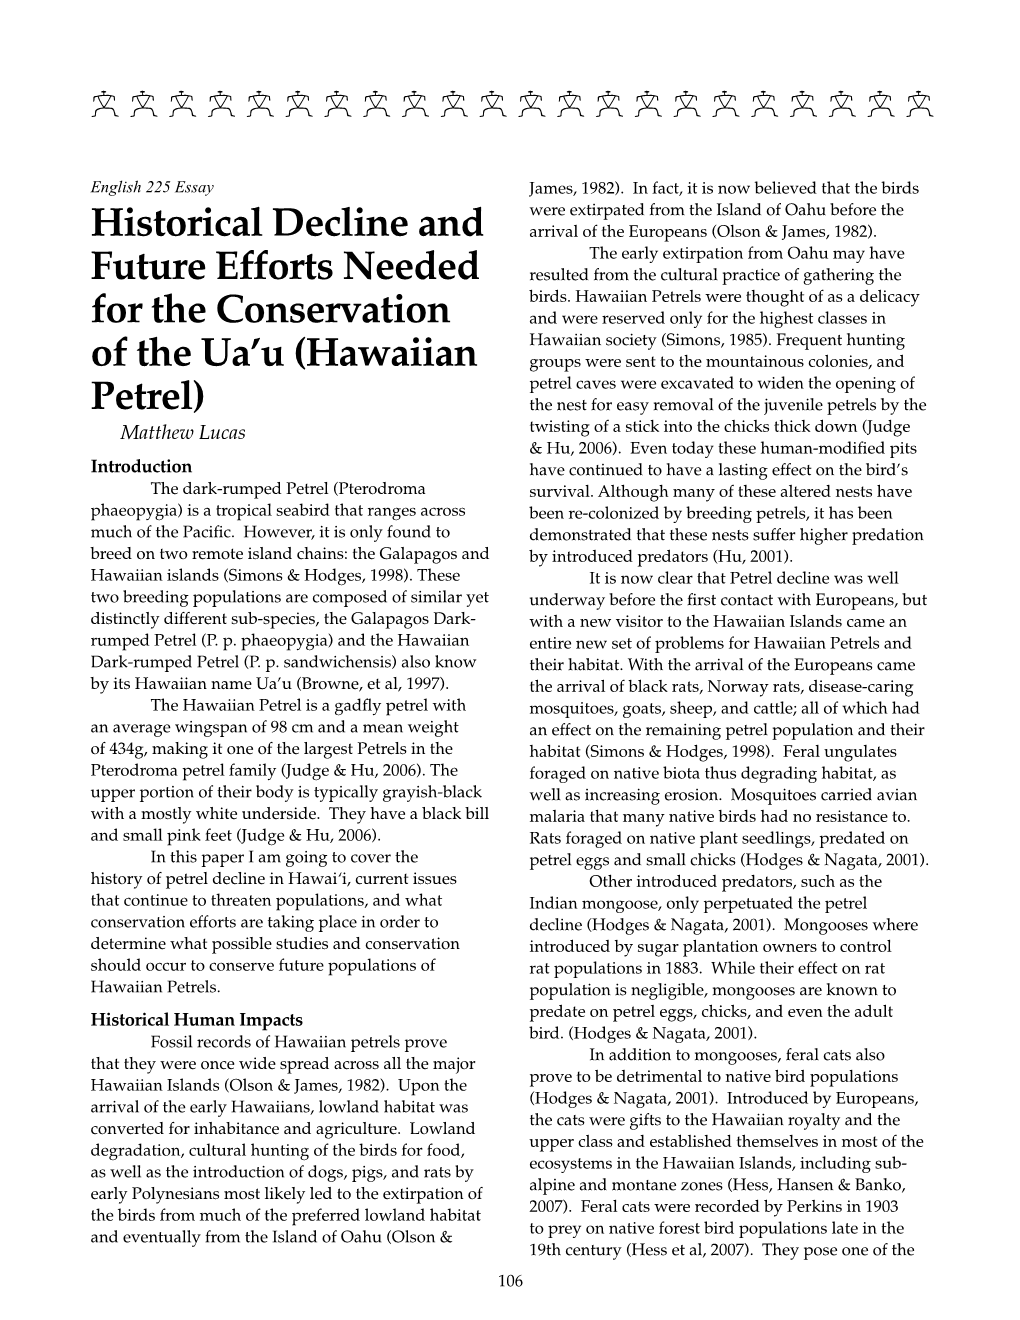 Historical Decline and Future Efforts Needed for the Conservation of the Ua'u (Hawaiian Petrel)